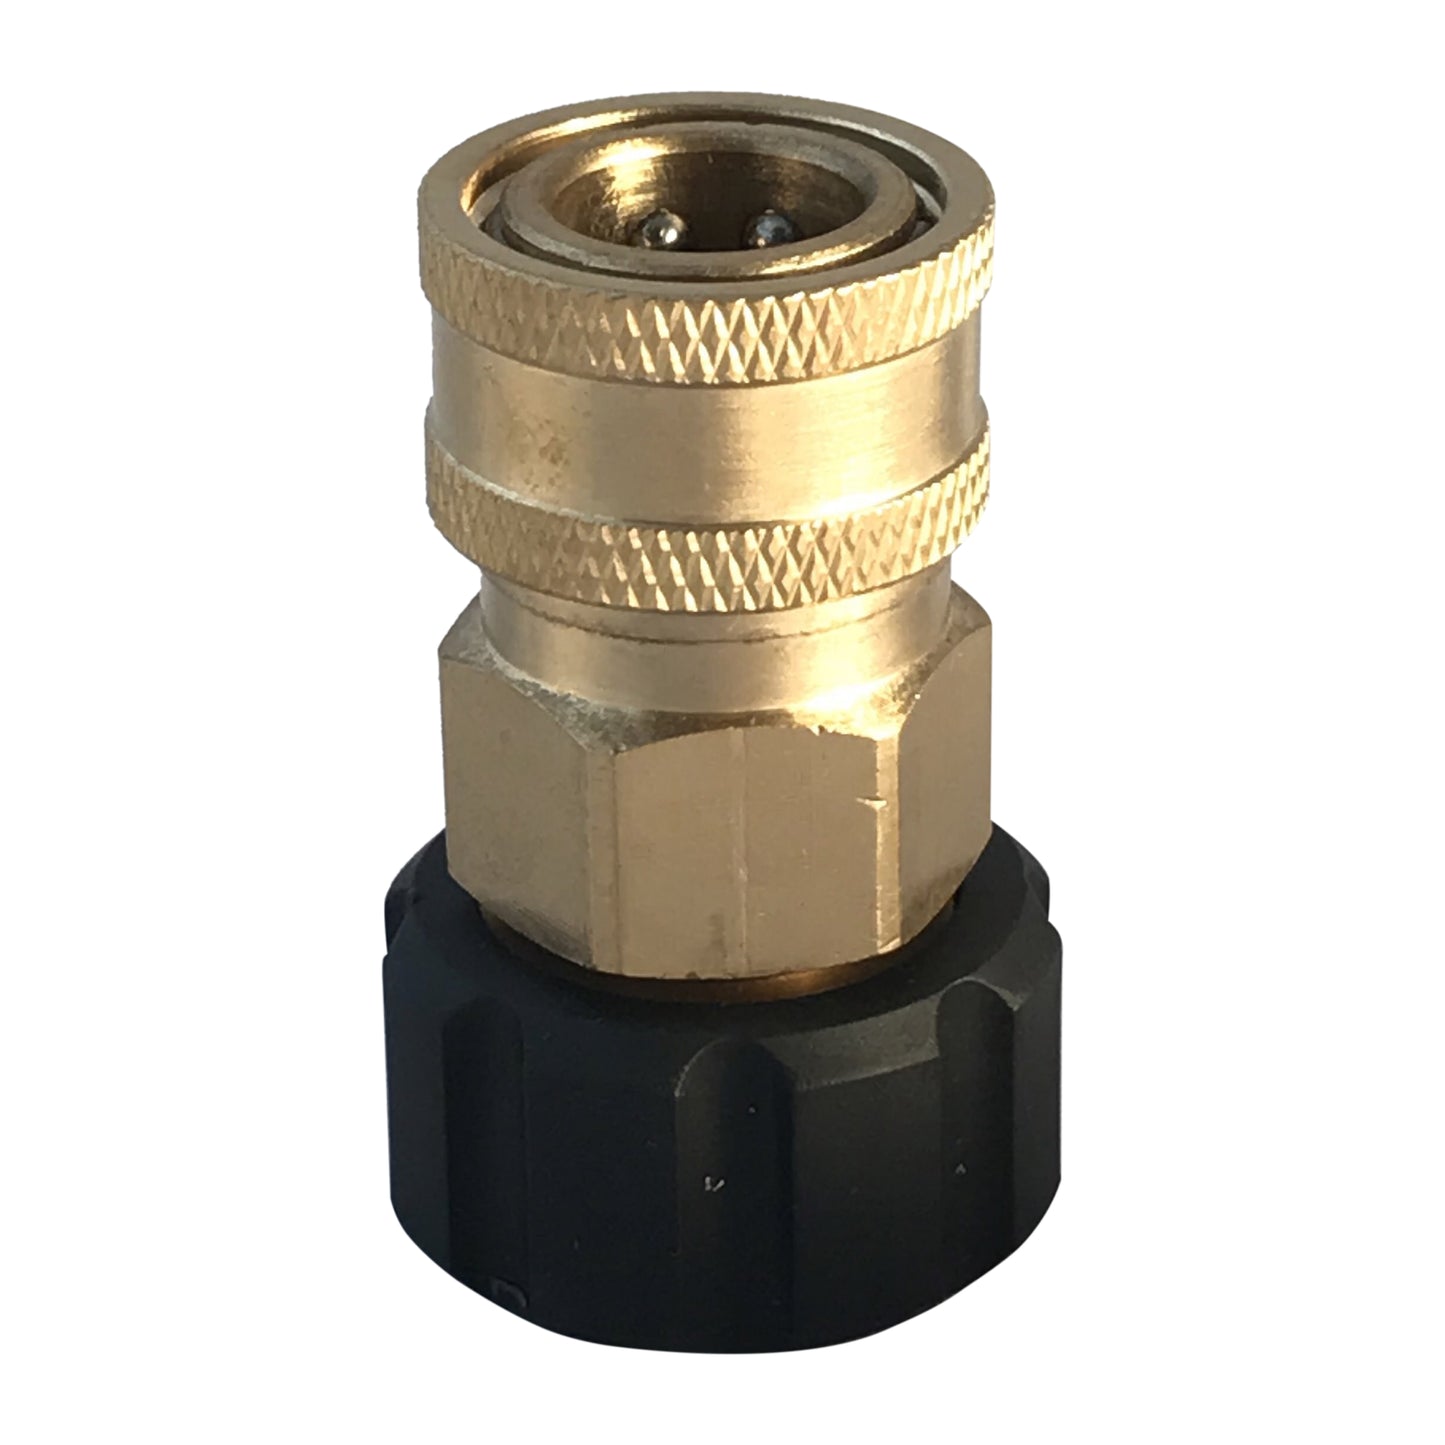 Pressure Washer M22 Female M22 Screw thread, to 3/8 inch female Quick Connector coupling